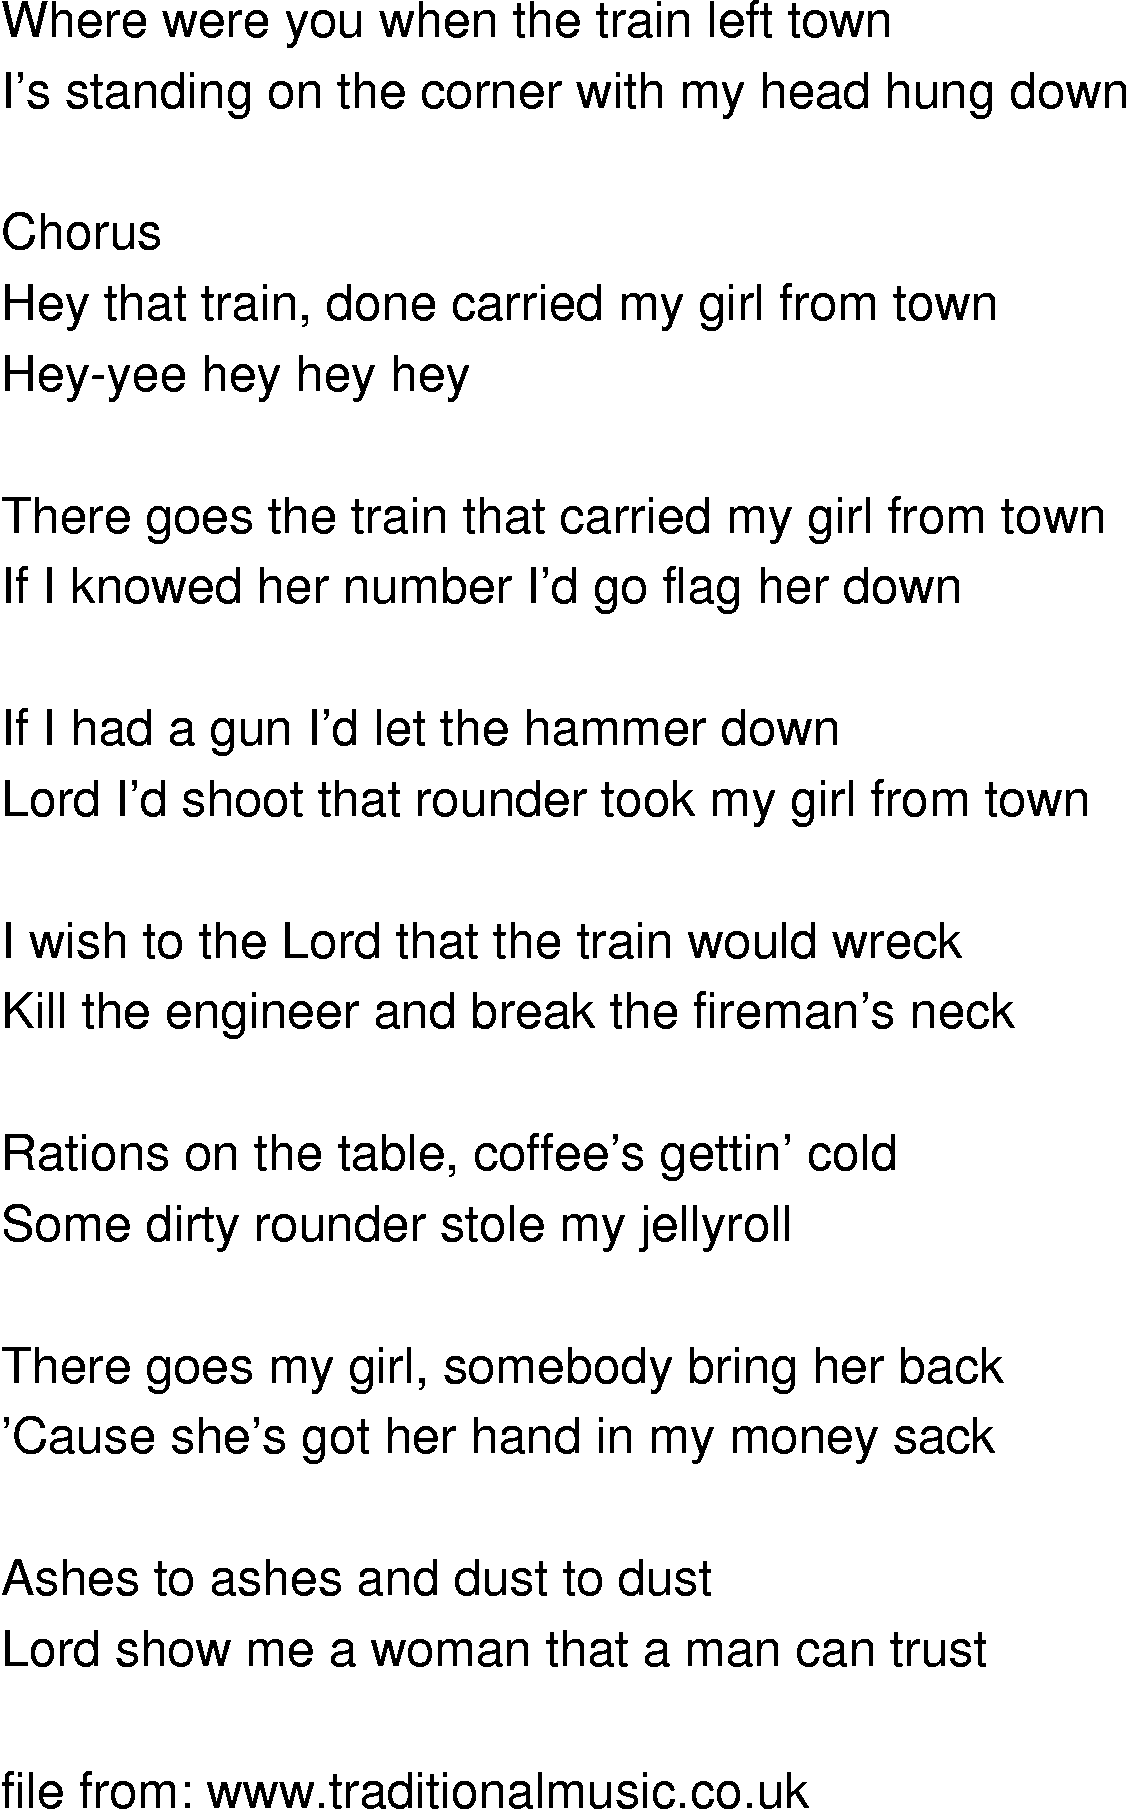 Old-Time (oldtimey) Song Lyrics - train that carried my girl from town